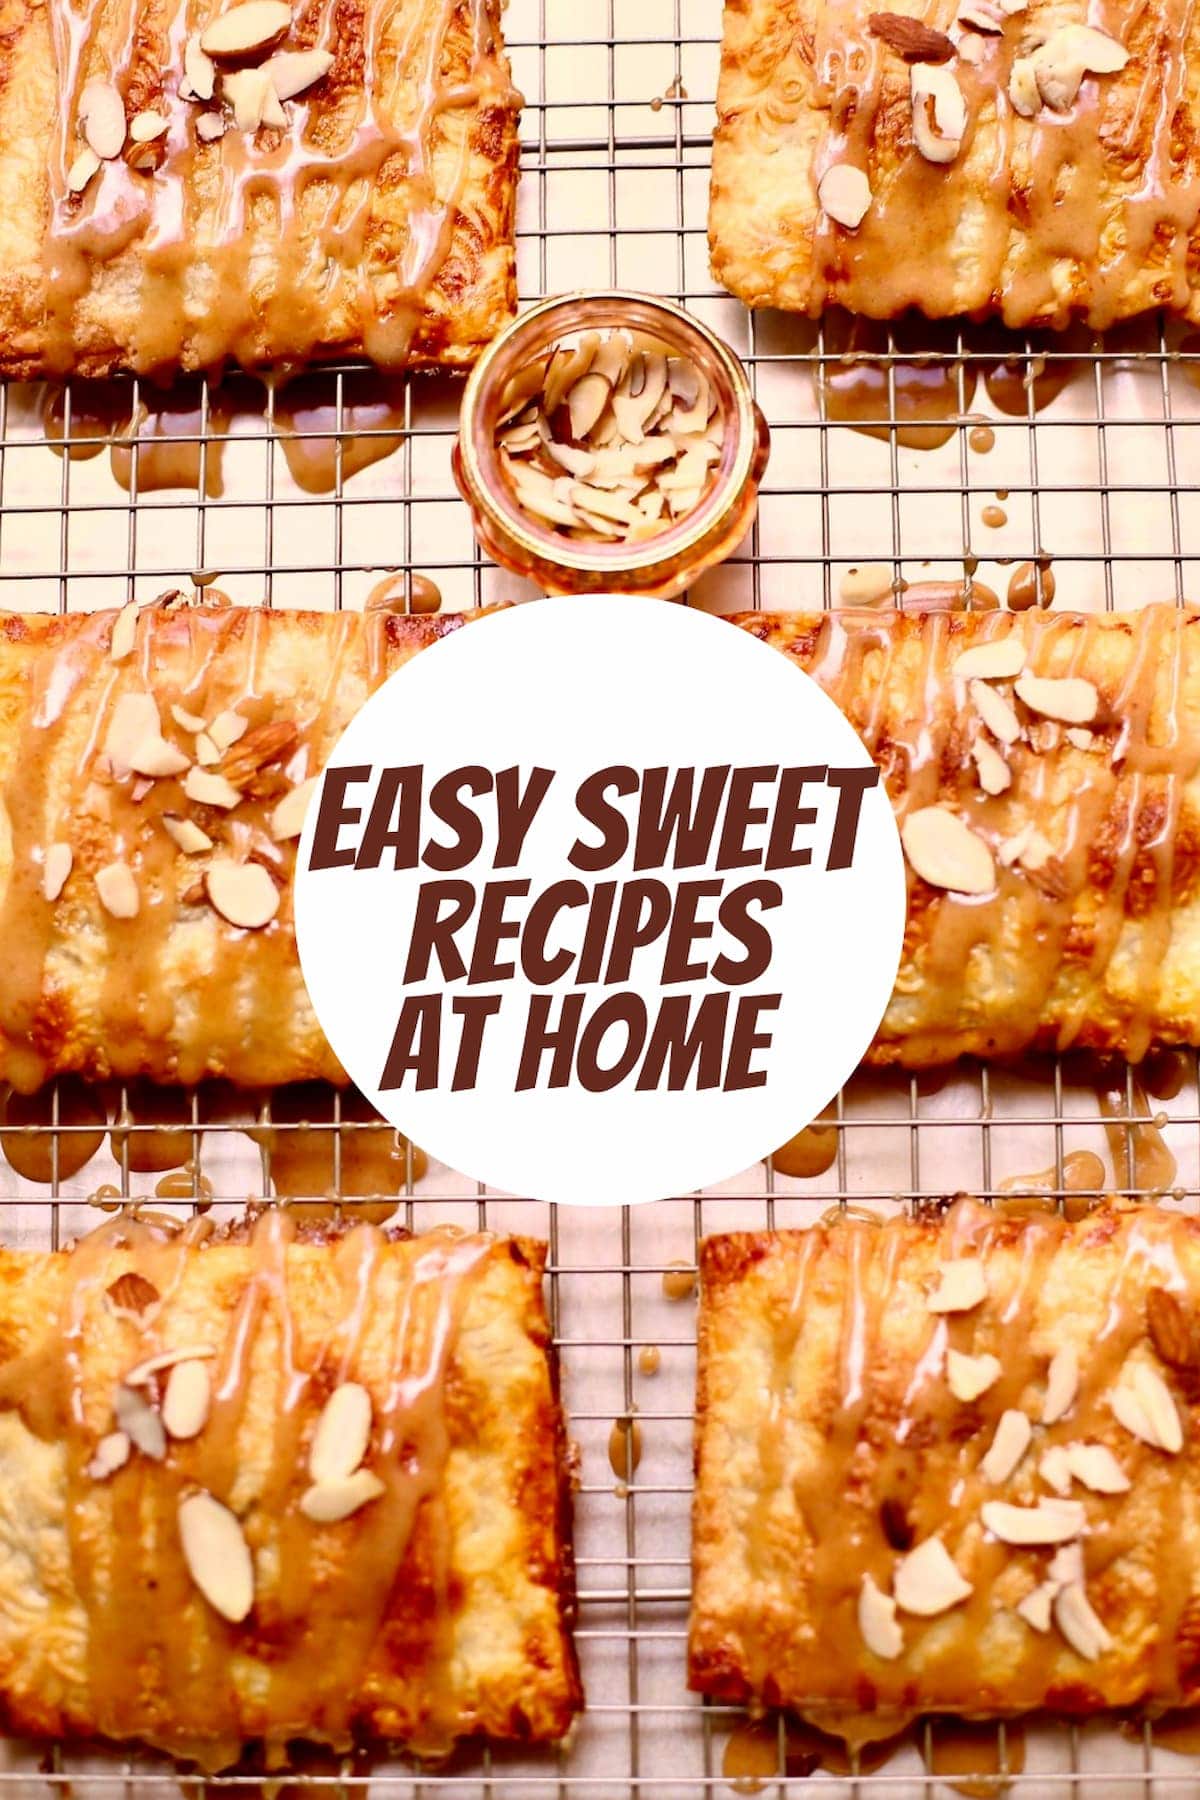 six pies on a wire rack and a circle of text saying make these sweet recipes at home.